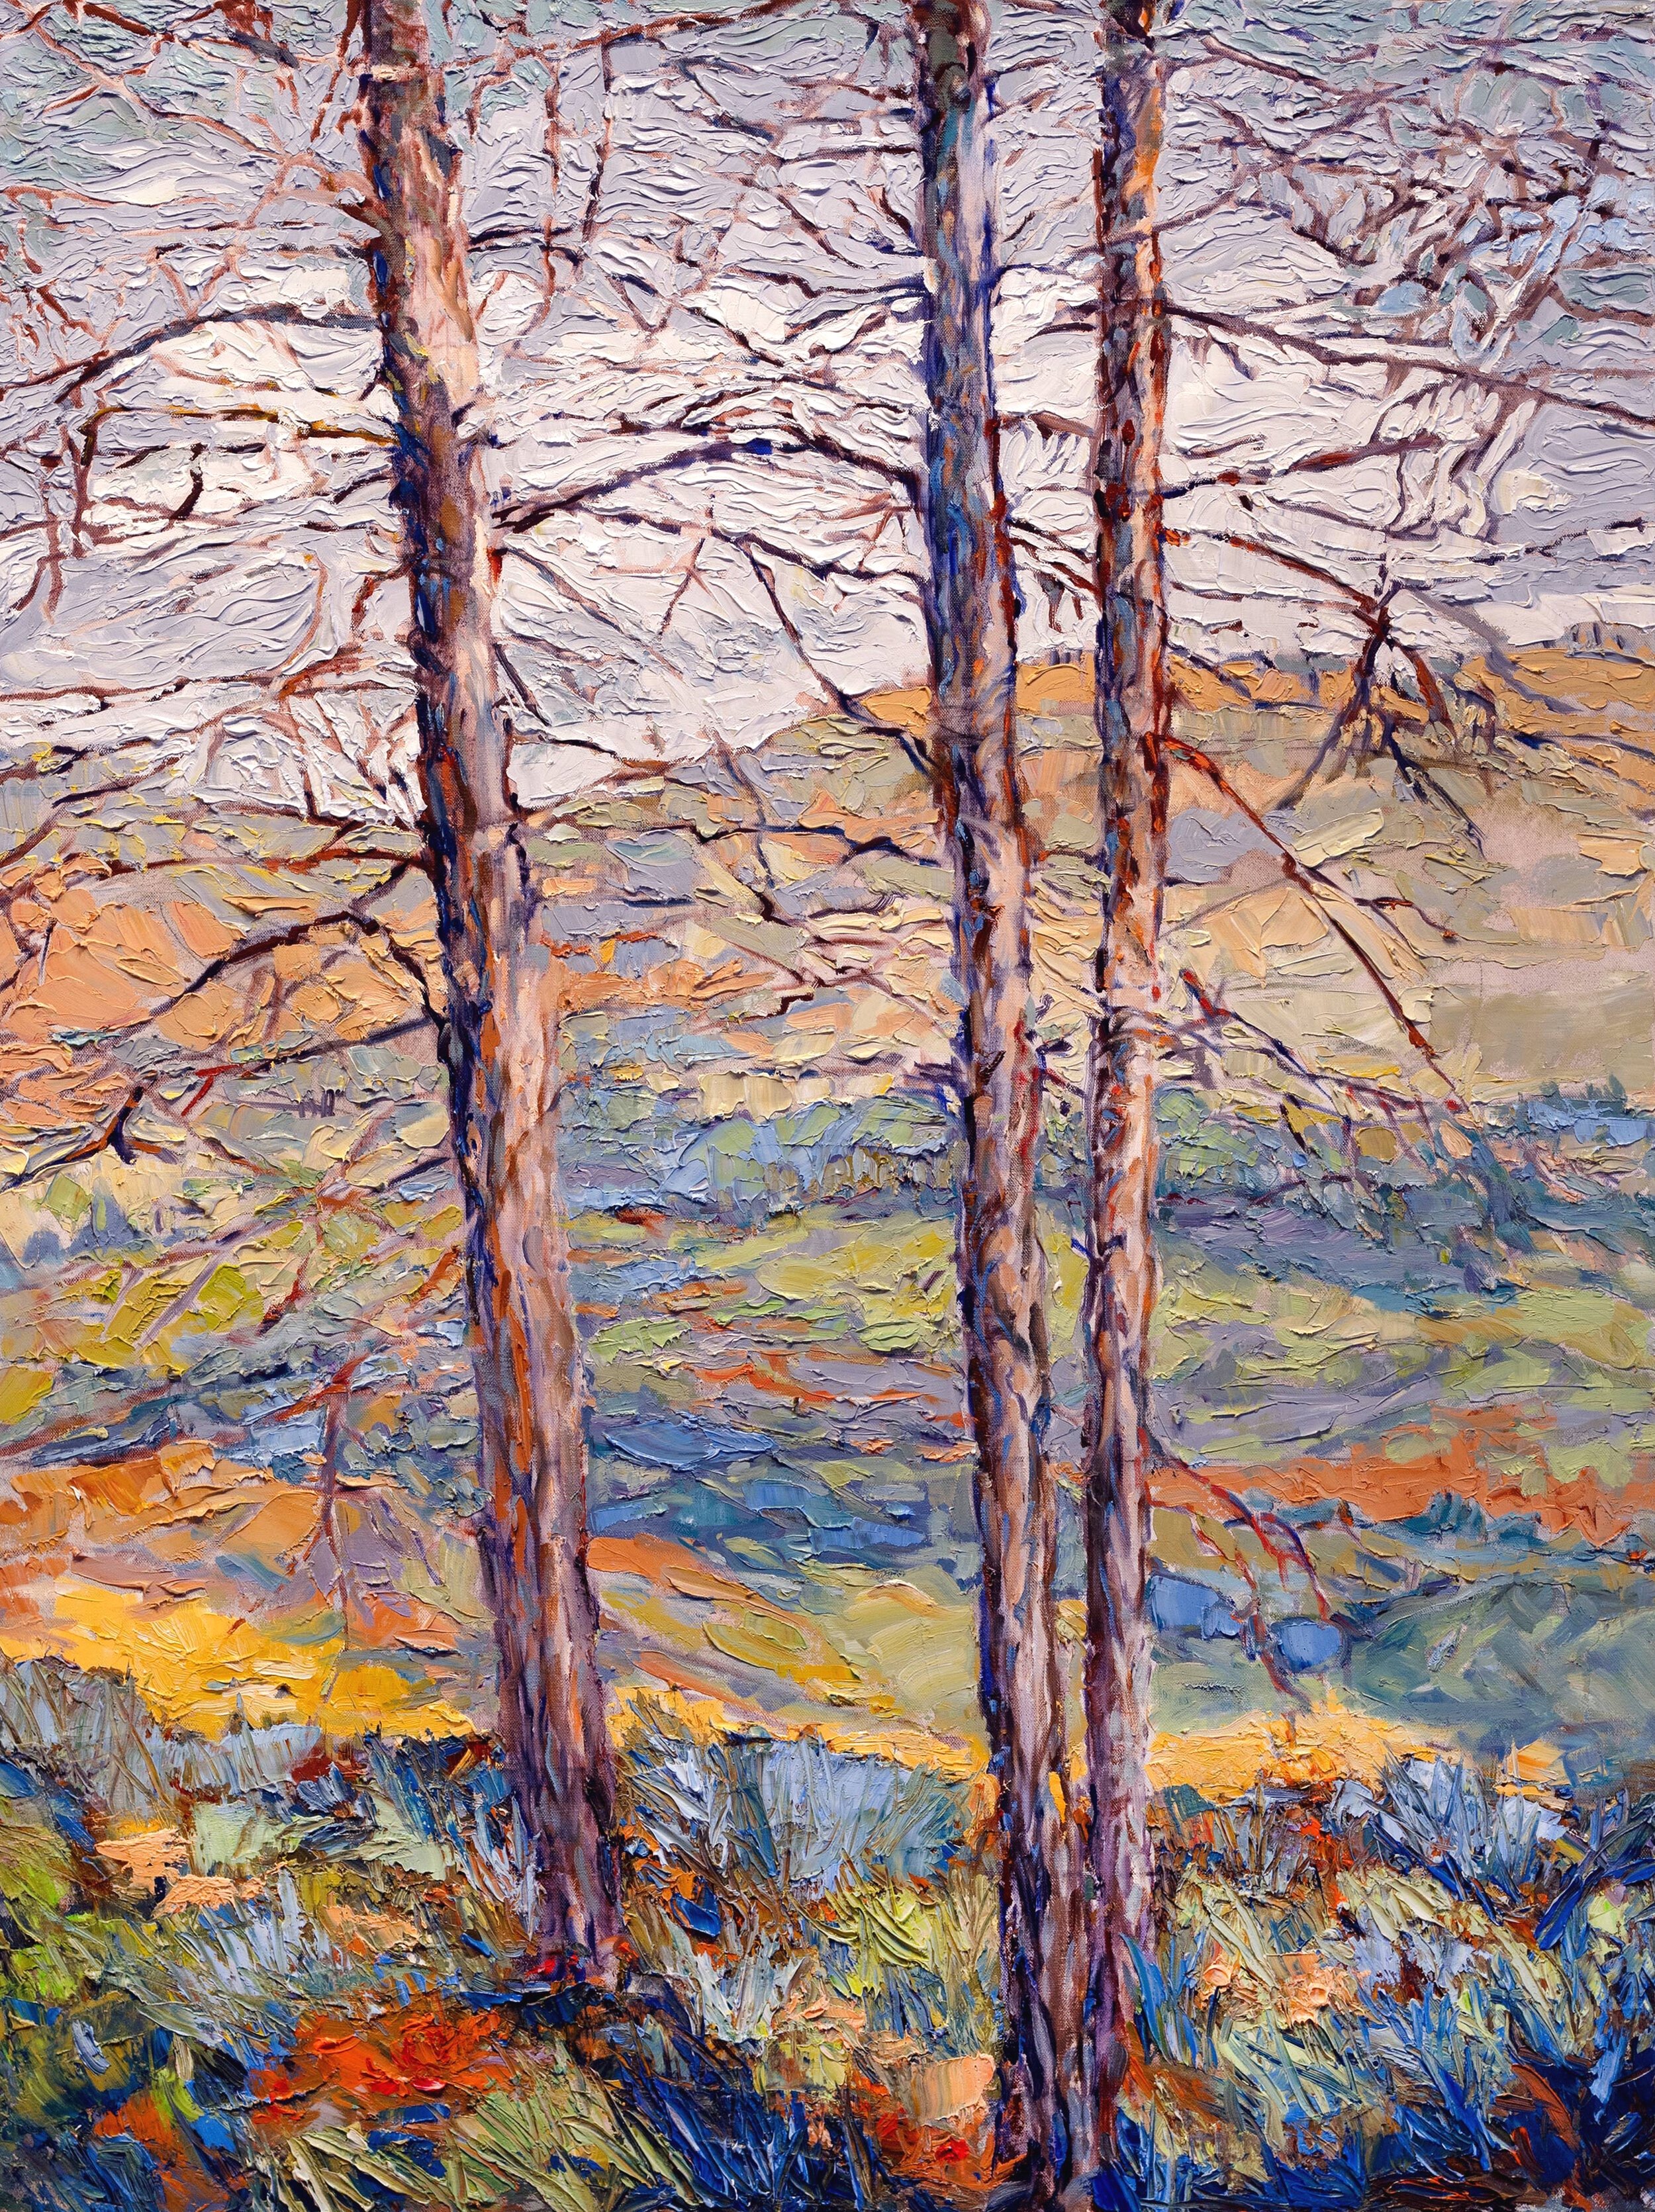   Three Trees Over the Hill   Oil on canvas  36” x 48”   